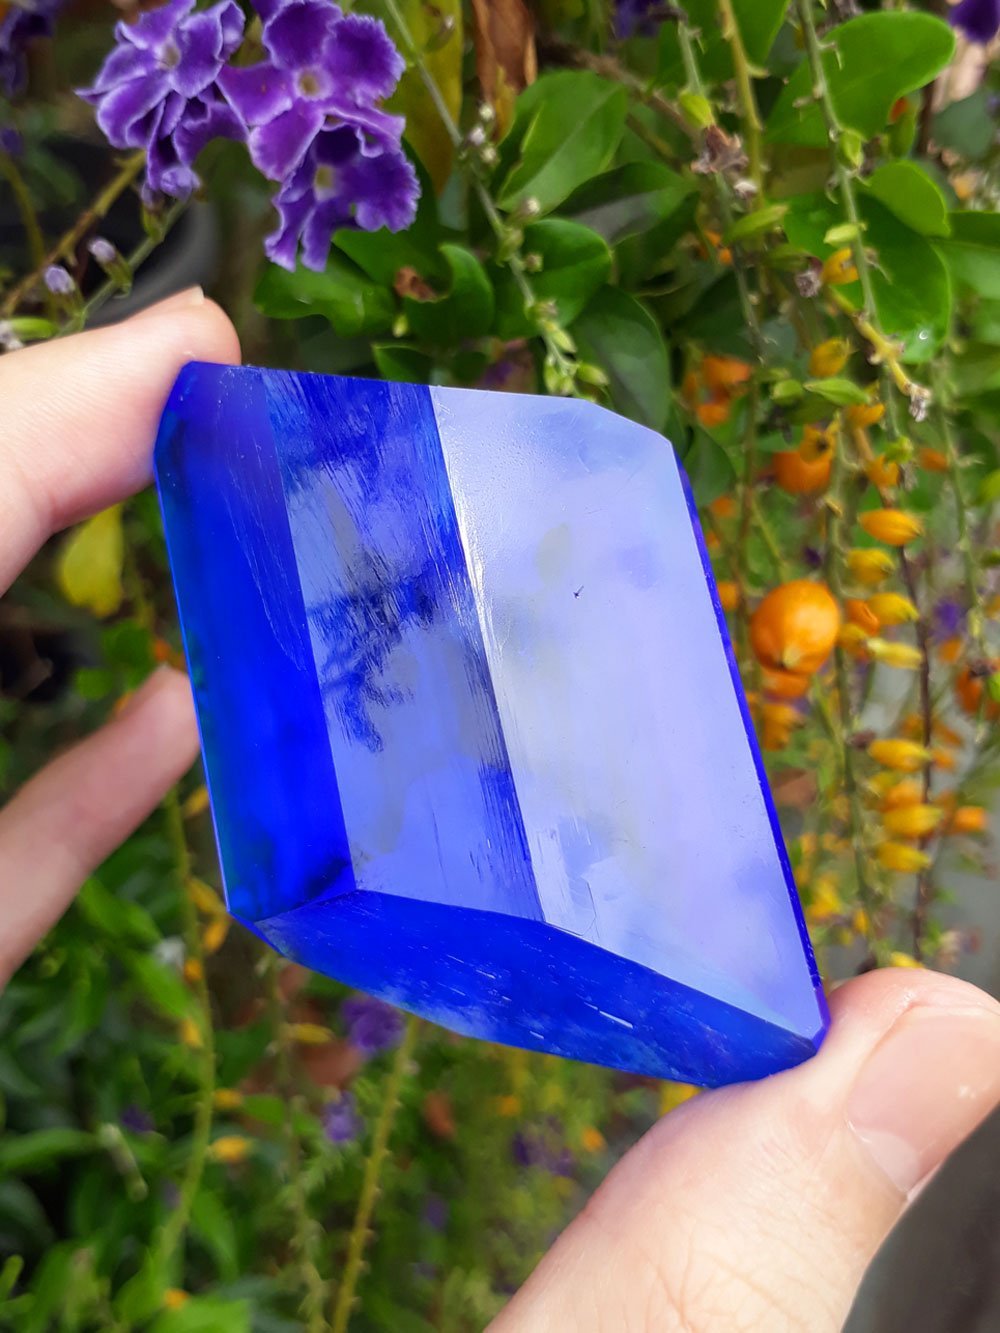 A large copper sulfate crystal